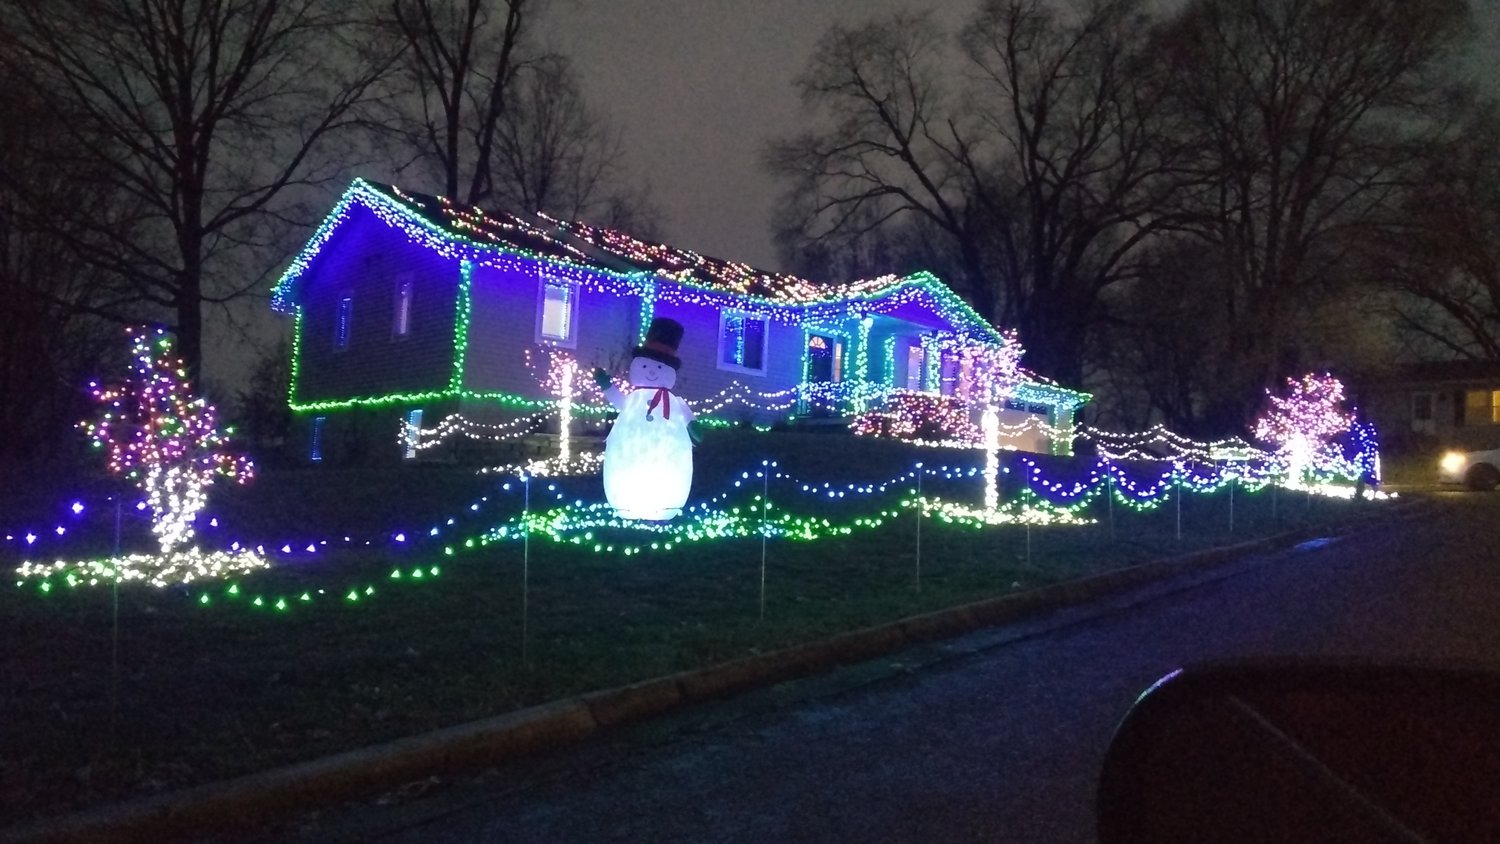 A community group surveyed the neighborhoods of Wellman and gave Matt Schaeffer’s house on Golf View Drive the win for the city’s 2022 Home Decorating Contest.